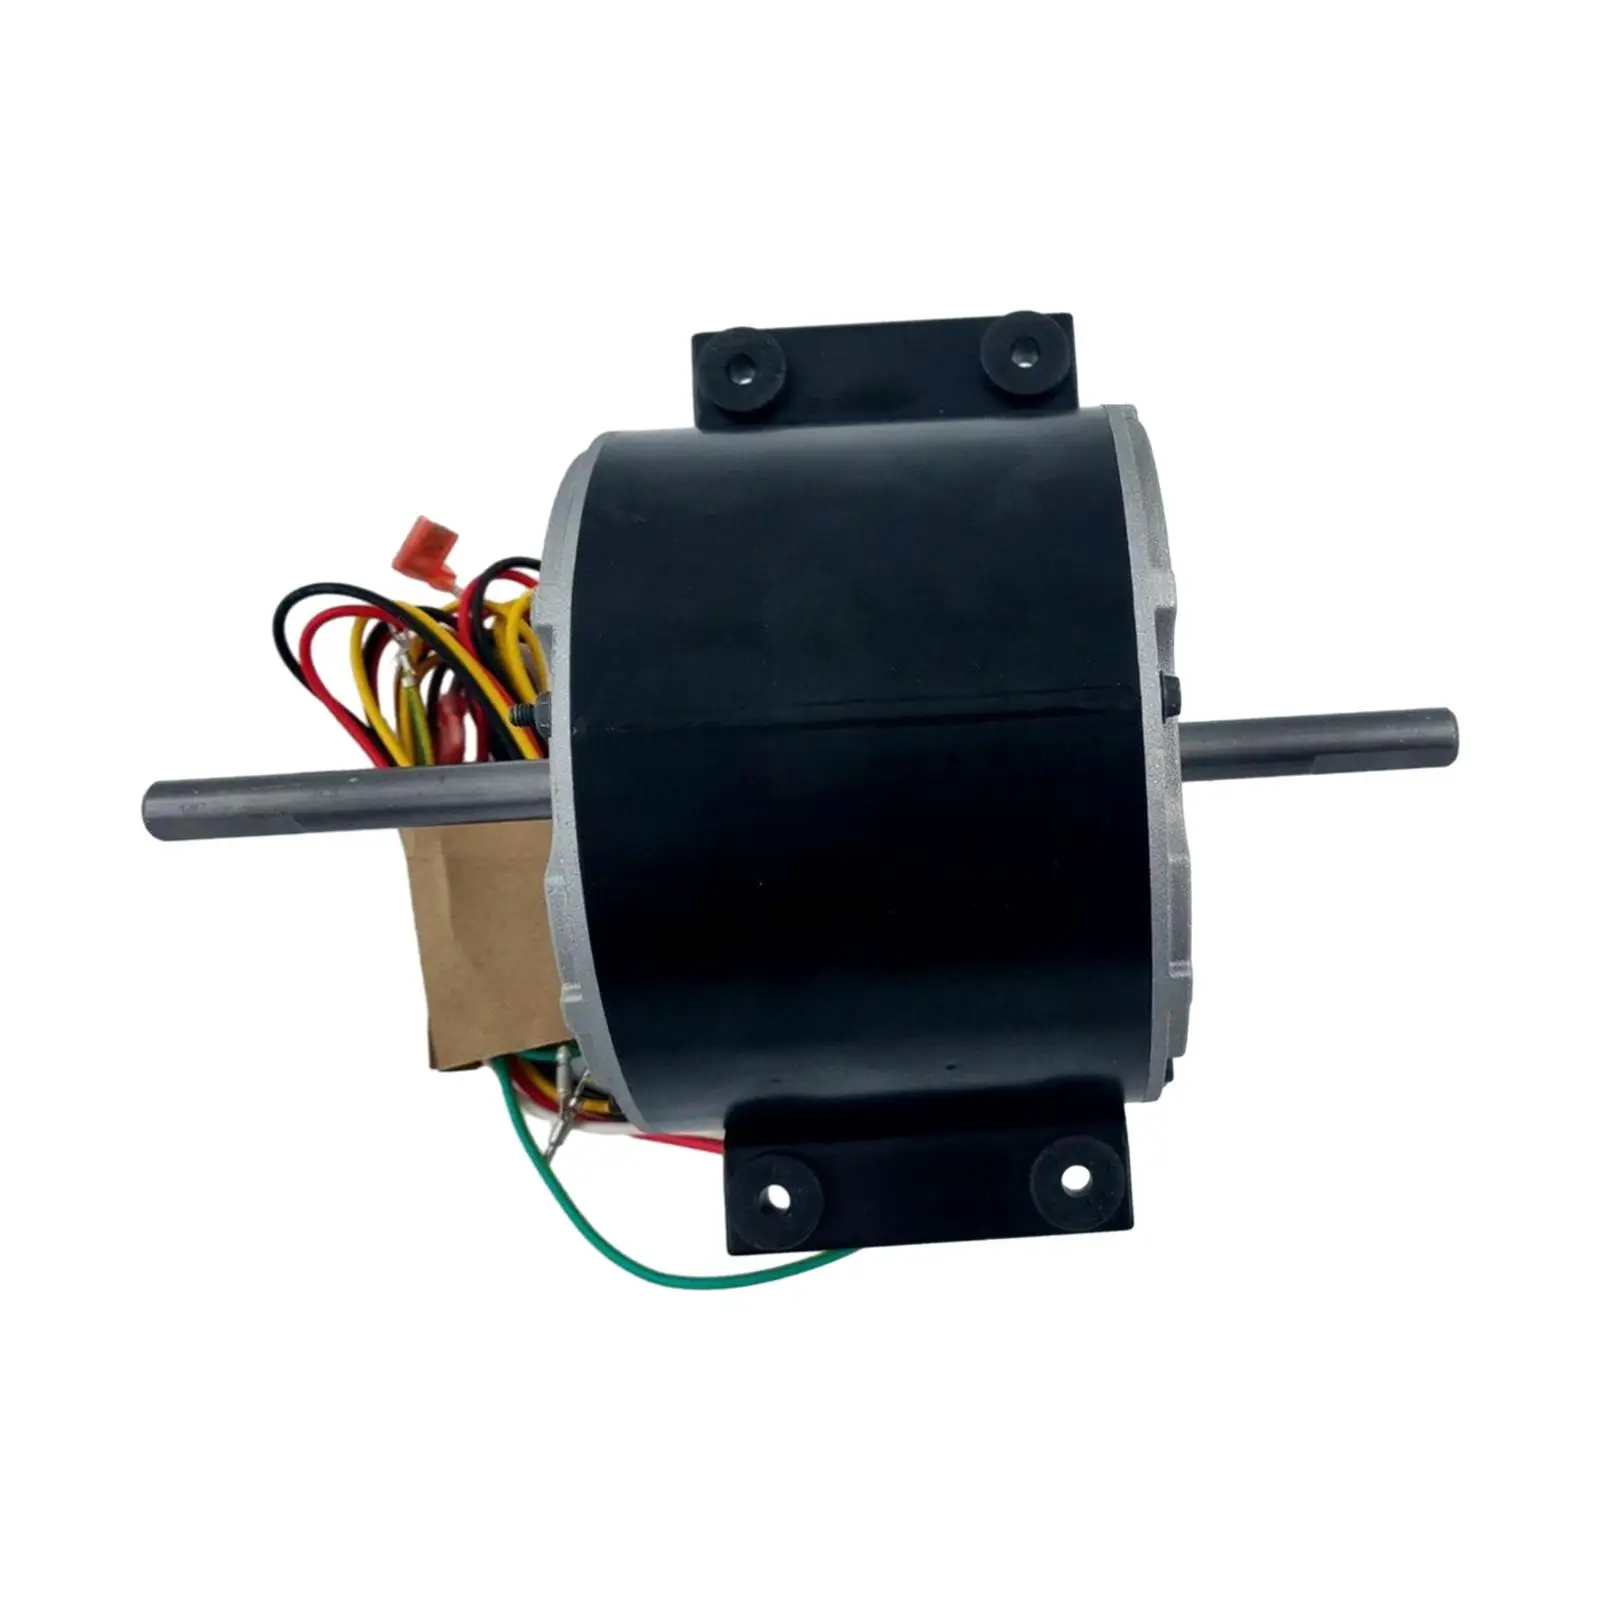 Condenser Fan Motor 3315332.005 Replacement Parts 3 Speed for II Penguin B57915 B59186 B59146 Easy Installation